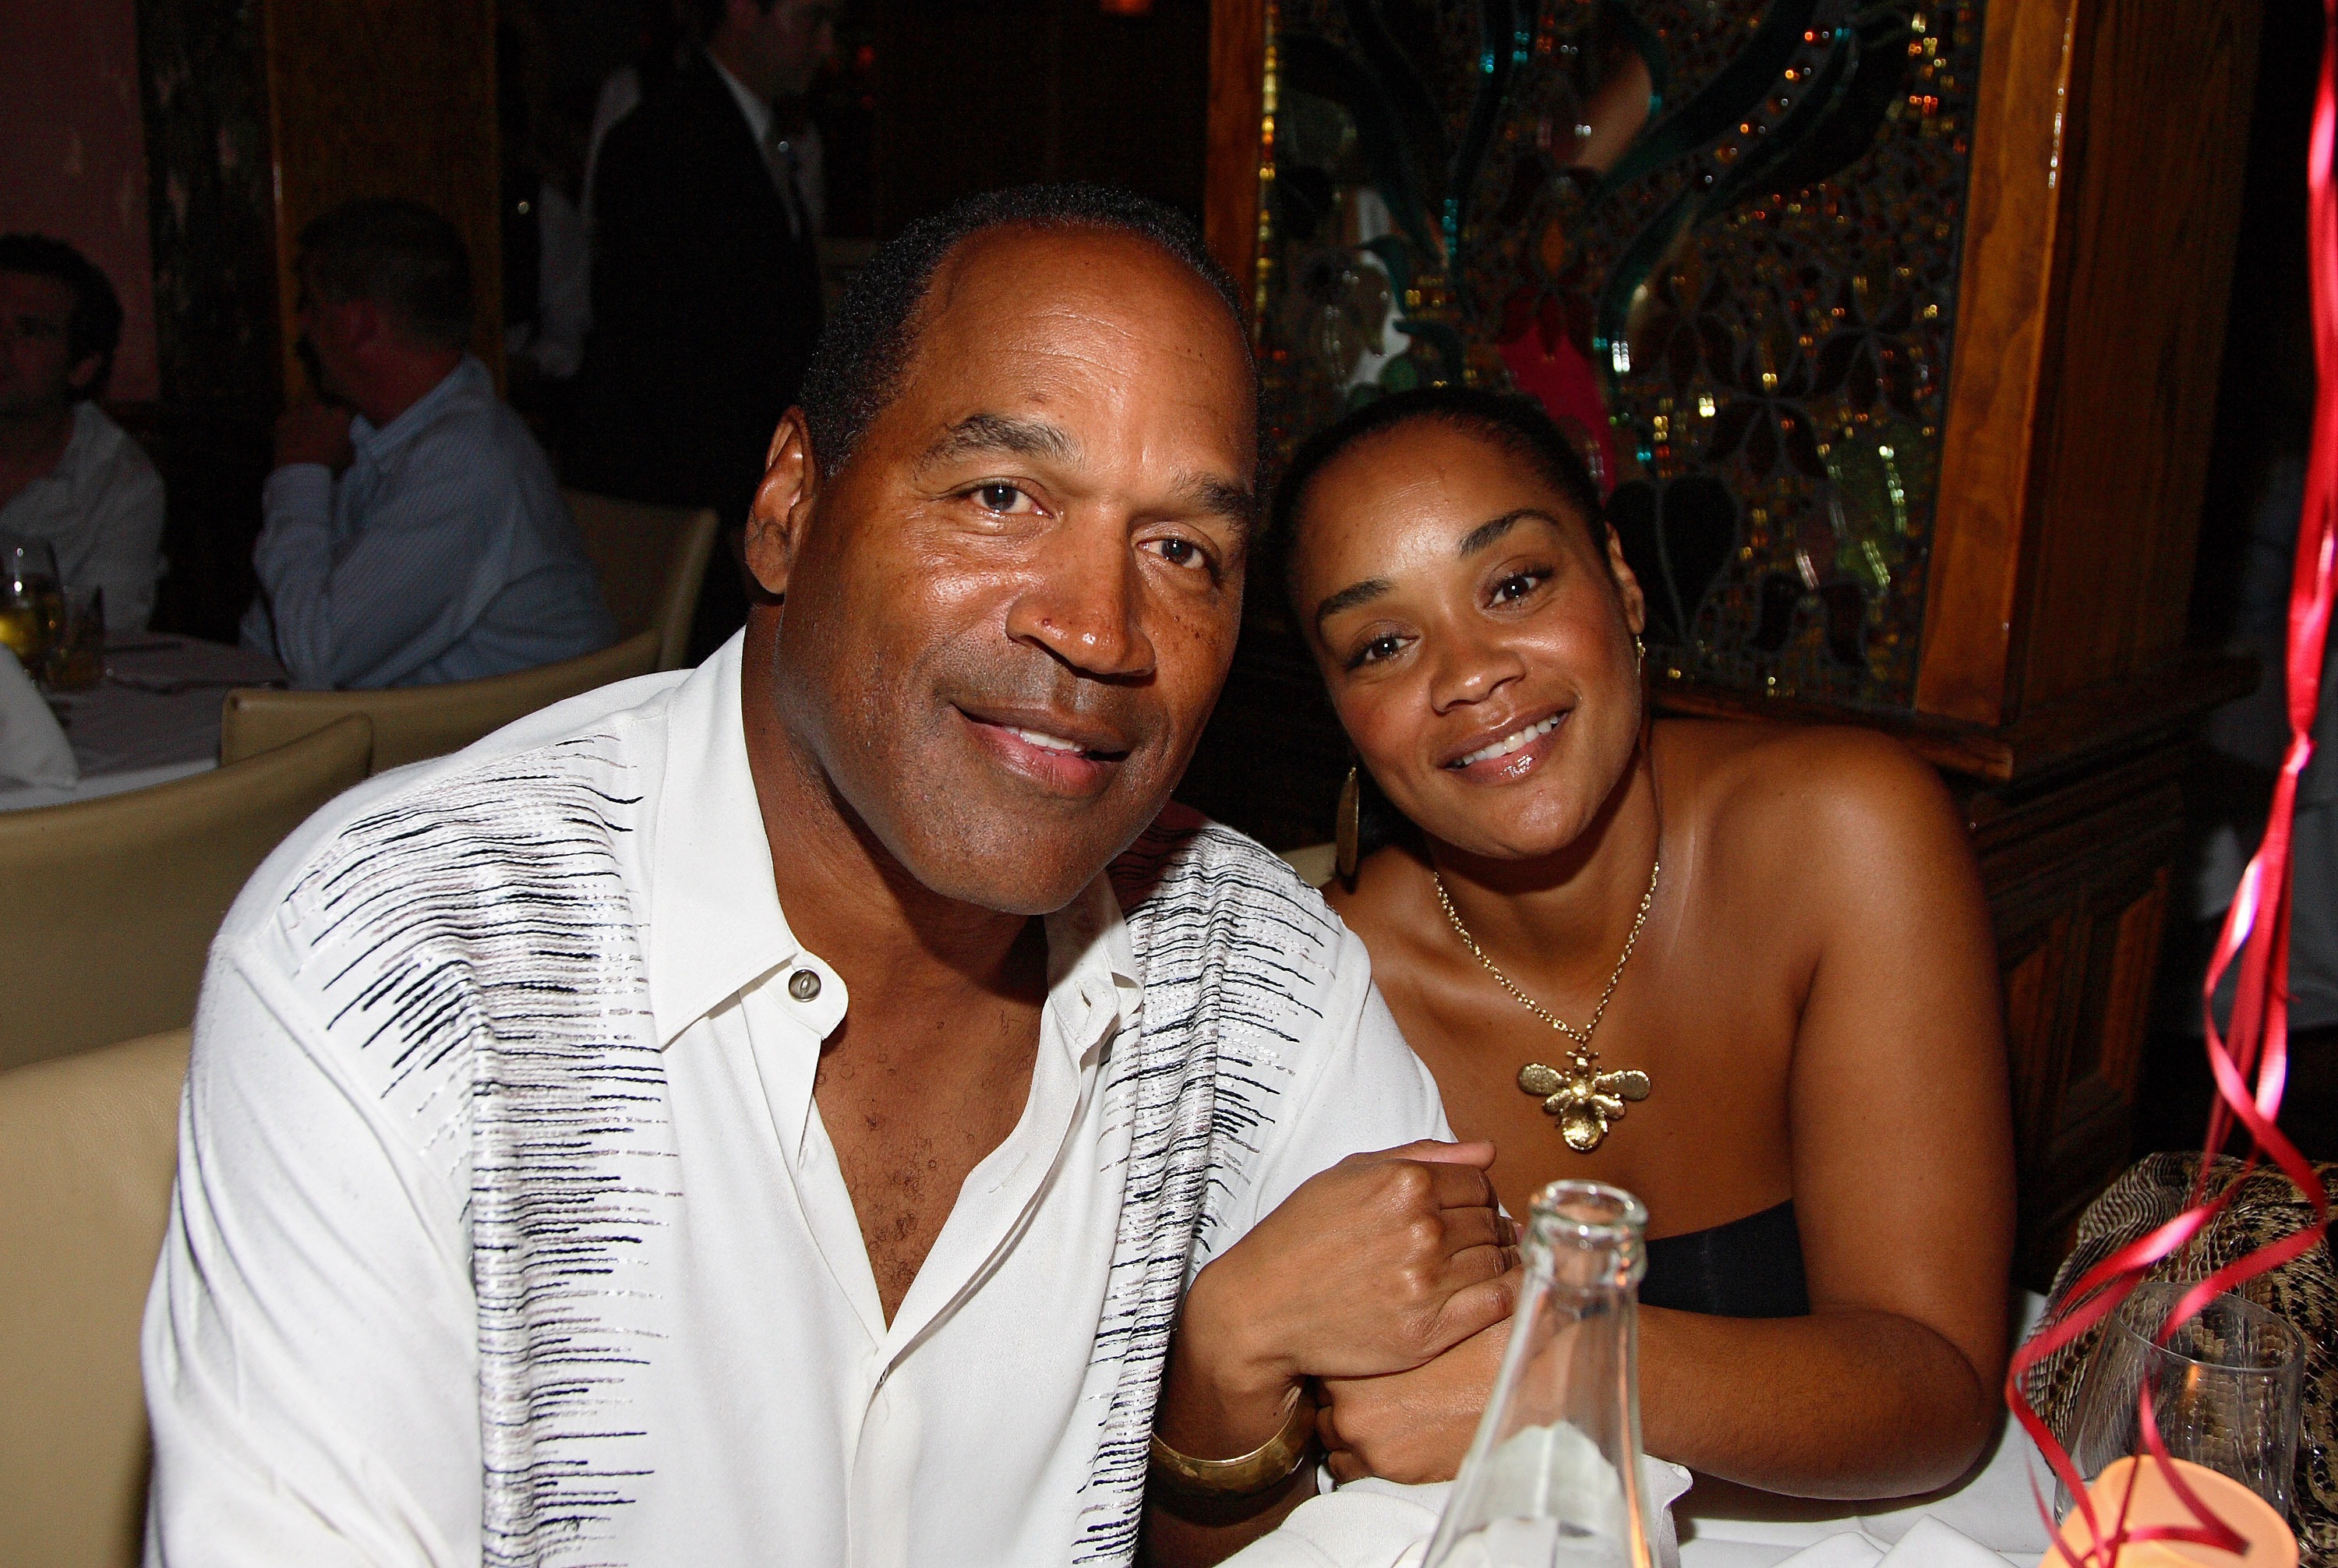 O.J. Simpson and Arnelle Simpson pose at the Forge restaurant during DJ Irie's birthday celebration on June 20, 2007, in Miami Beach, Florida. | Source: Getty Images